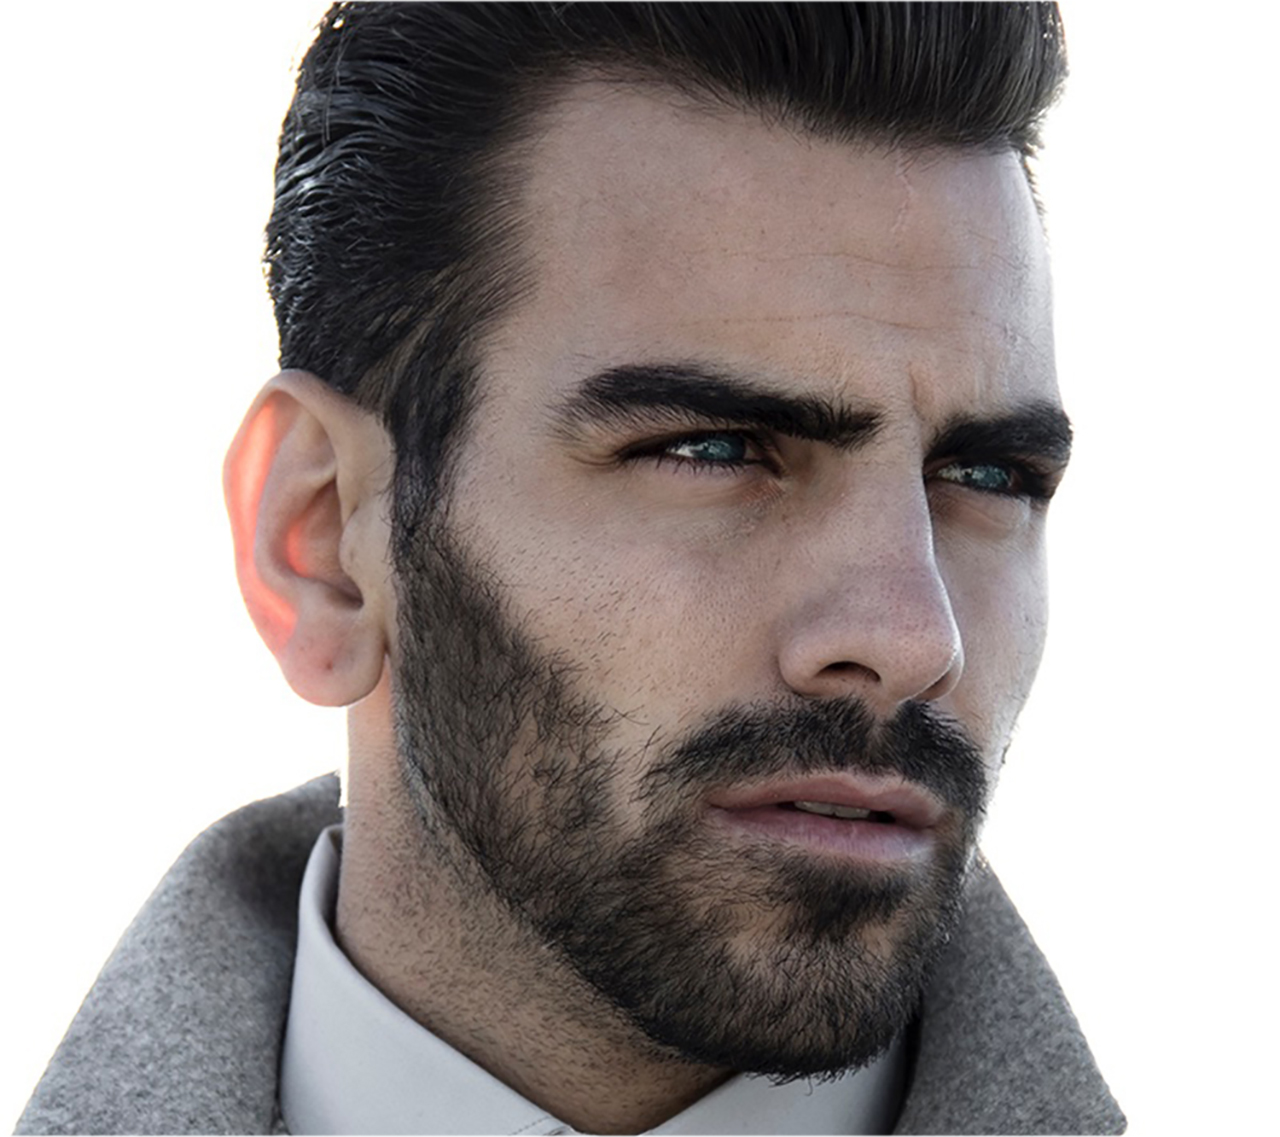 Nyle DiMarco looks away from the camera